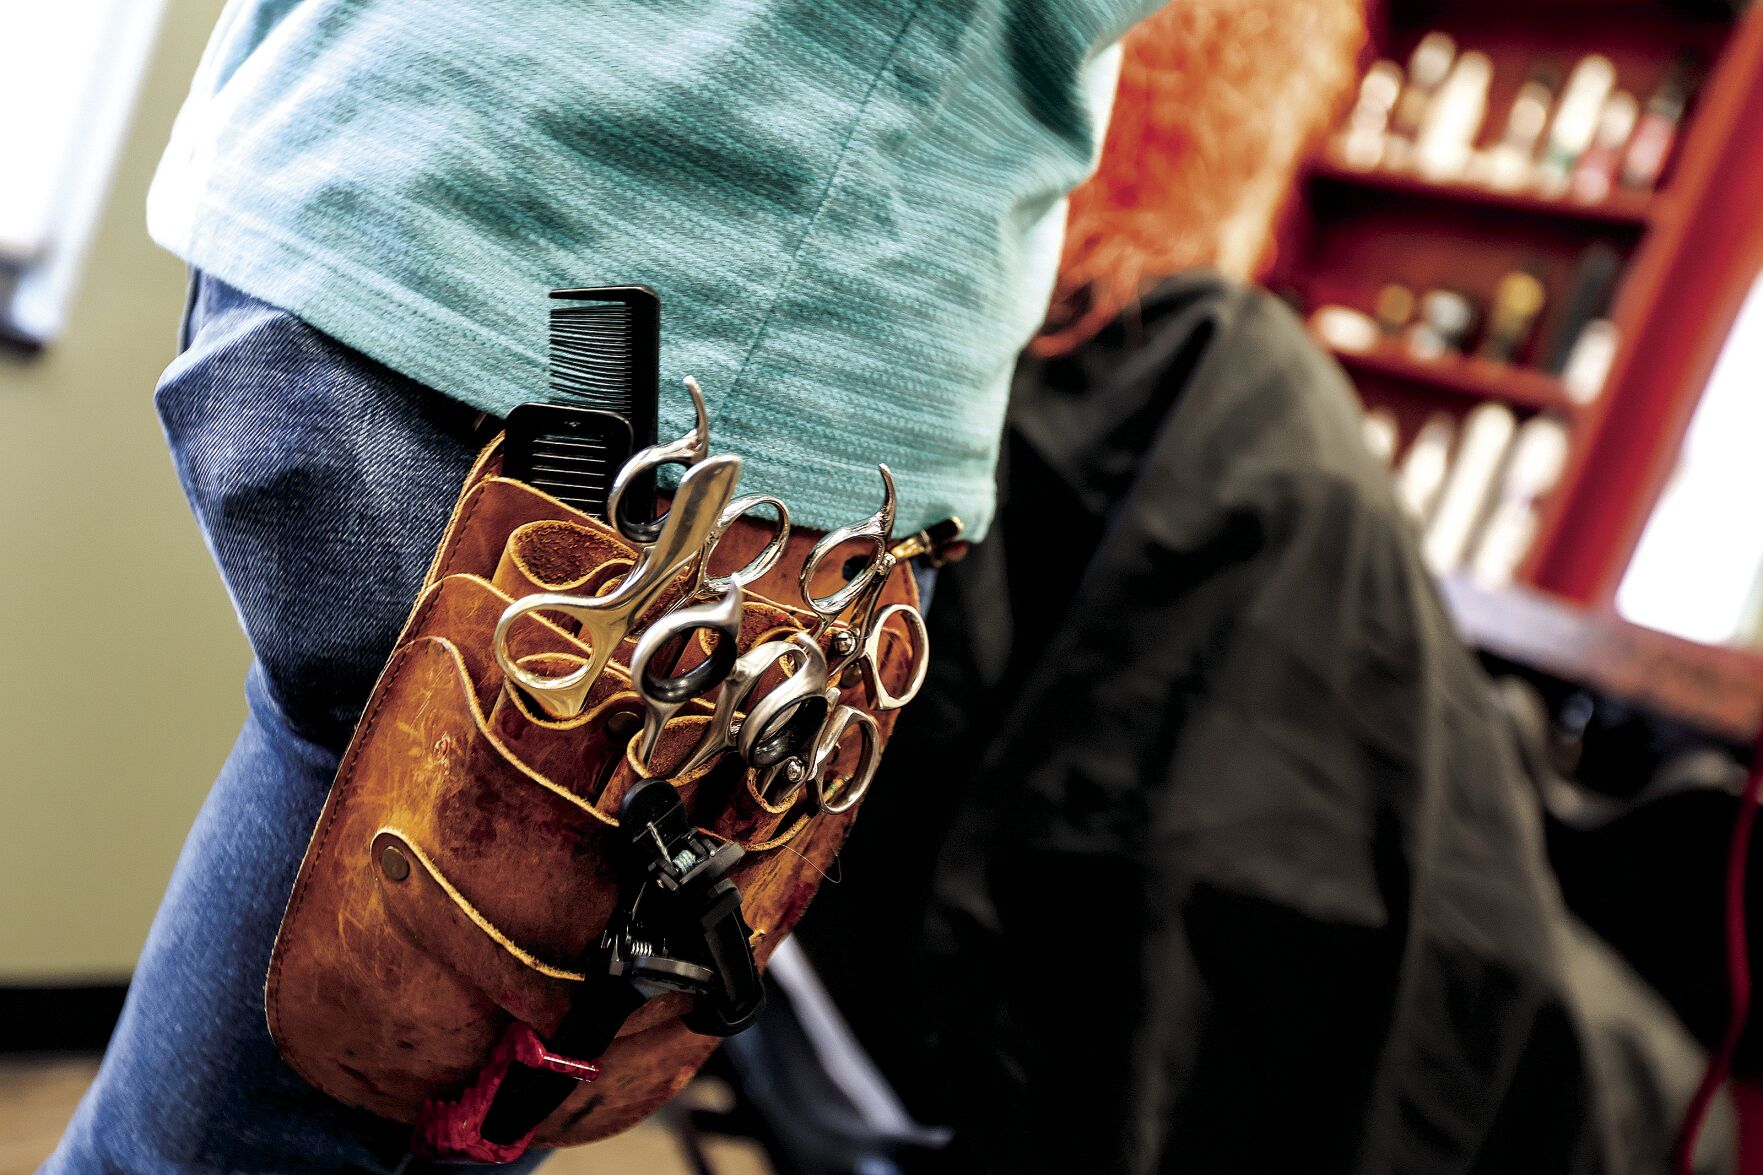 Owner of The Color Parlor, Christopher Bellings, has a tool belt built for his tools of the trade.    PHOTO CREDIT: Dave Kettering